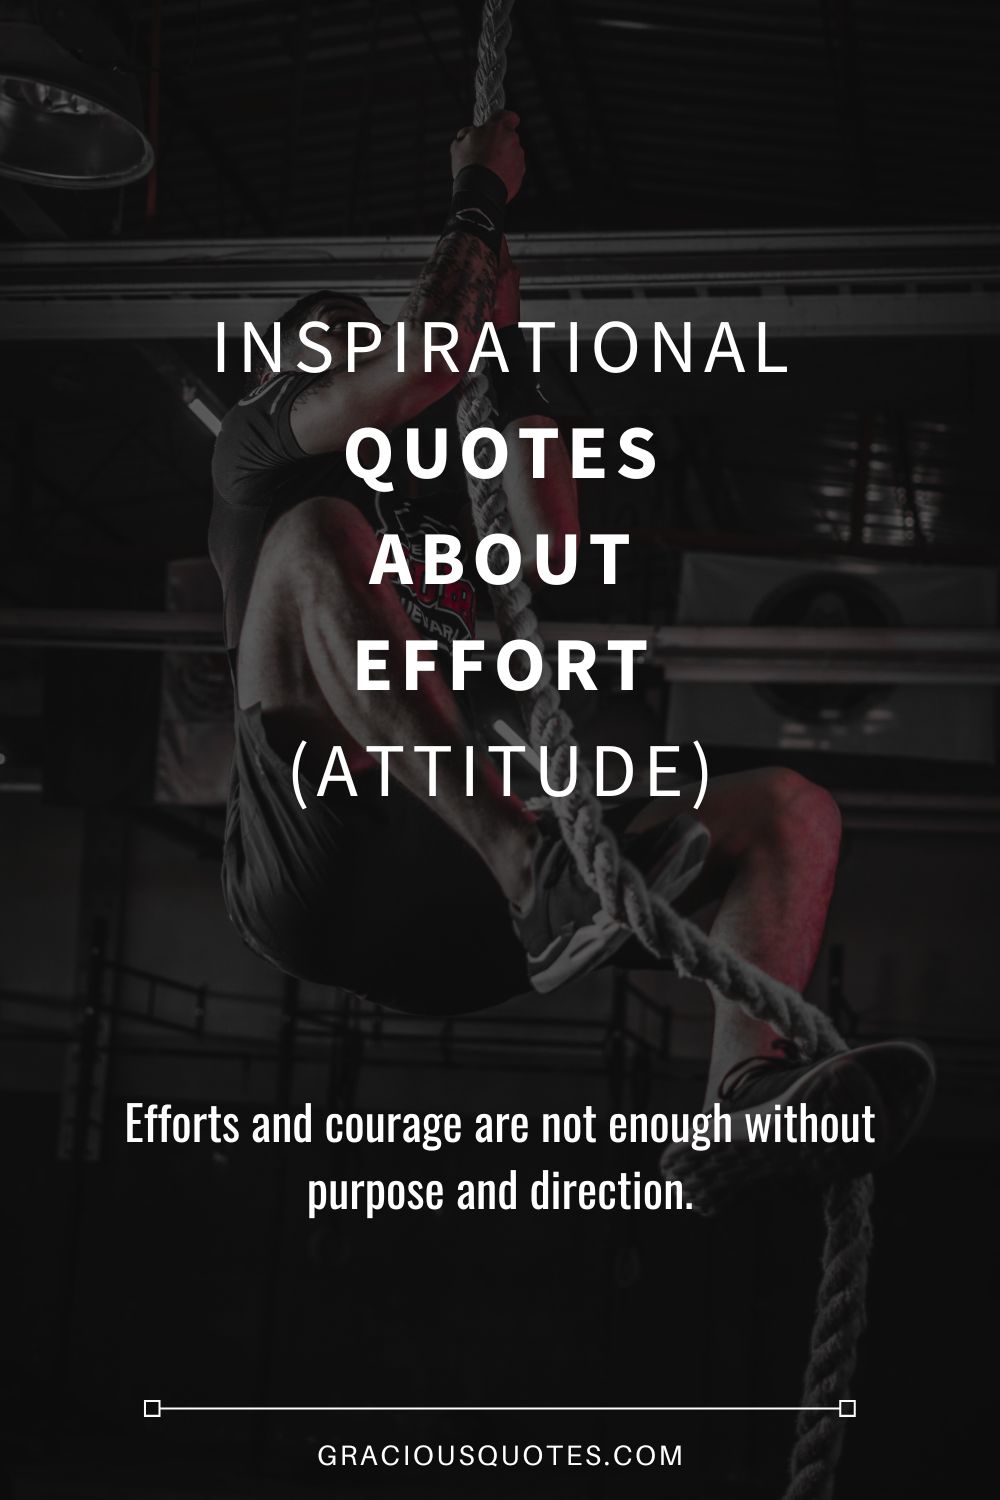 Inspirational Quotes About Effort (ATTITUDE) - Gracious Quotes